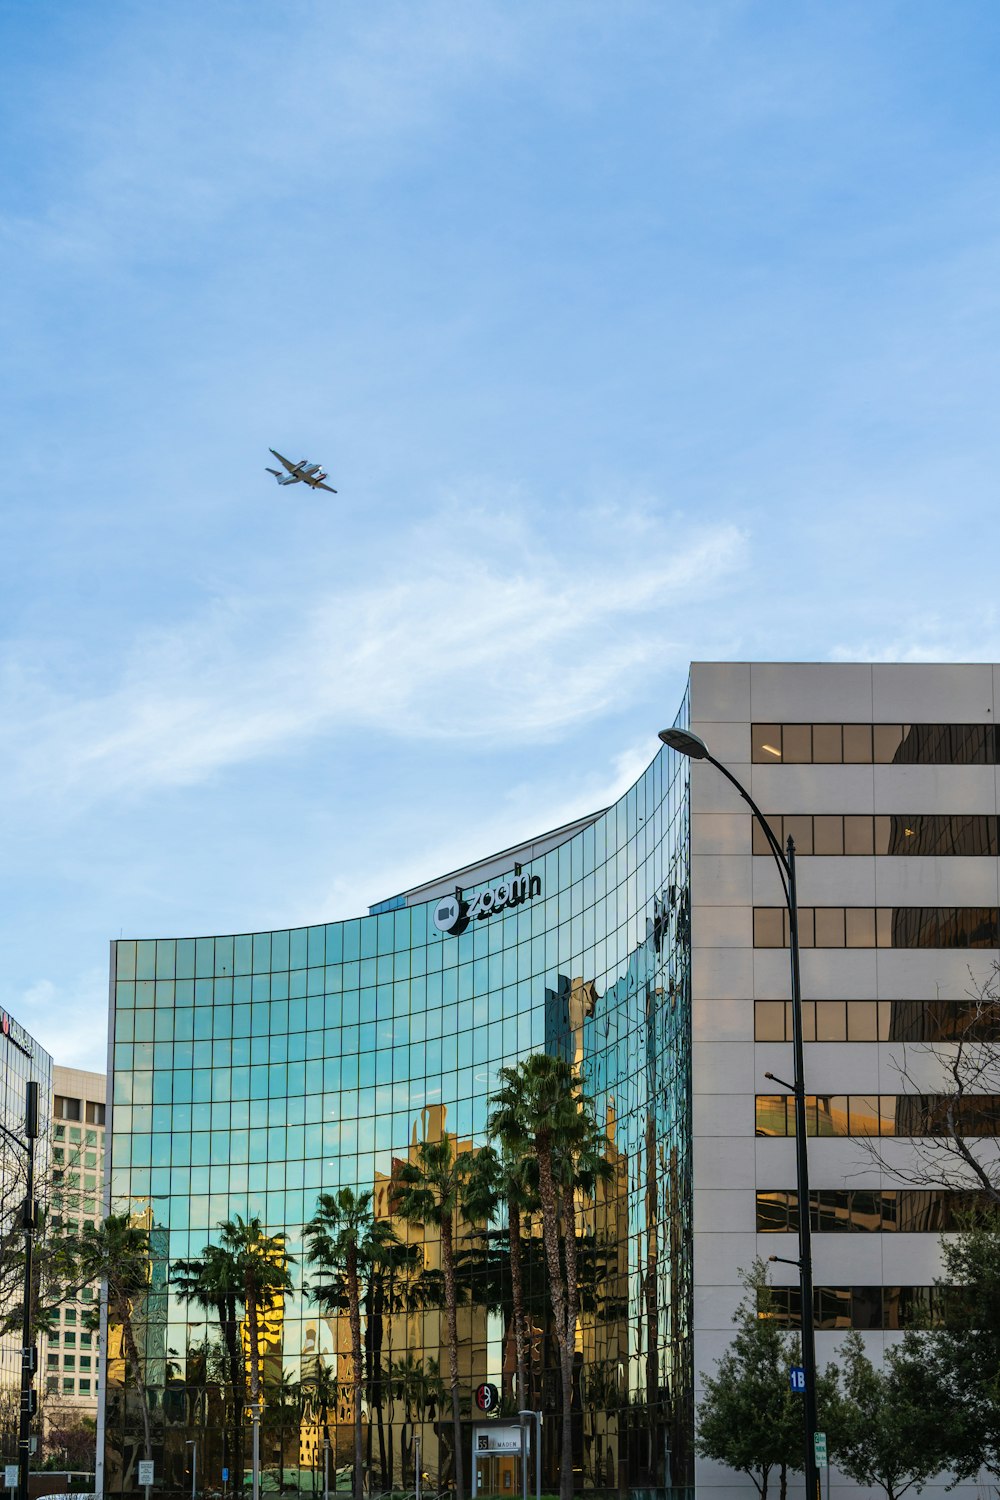 a plane flying over a large building